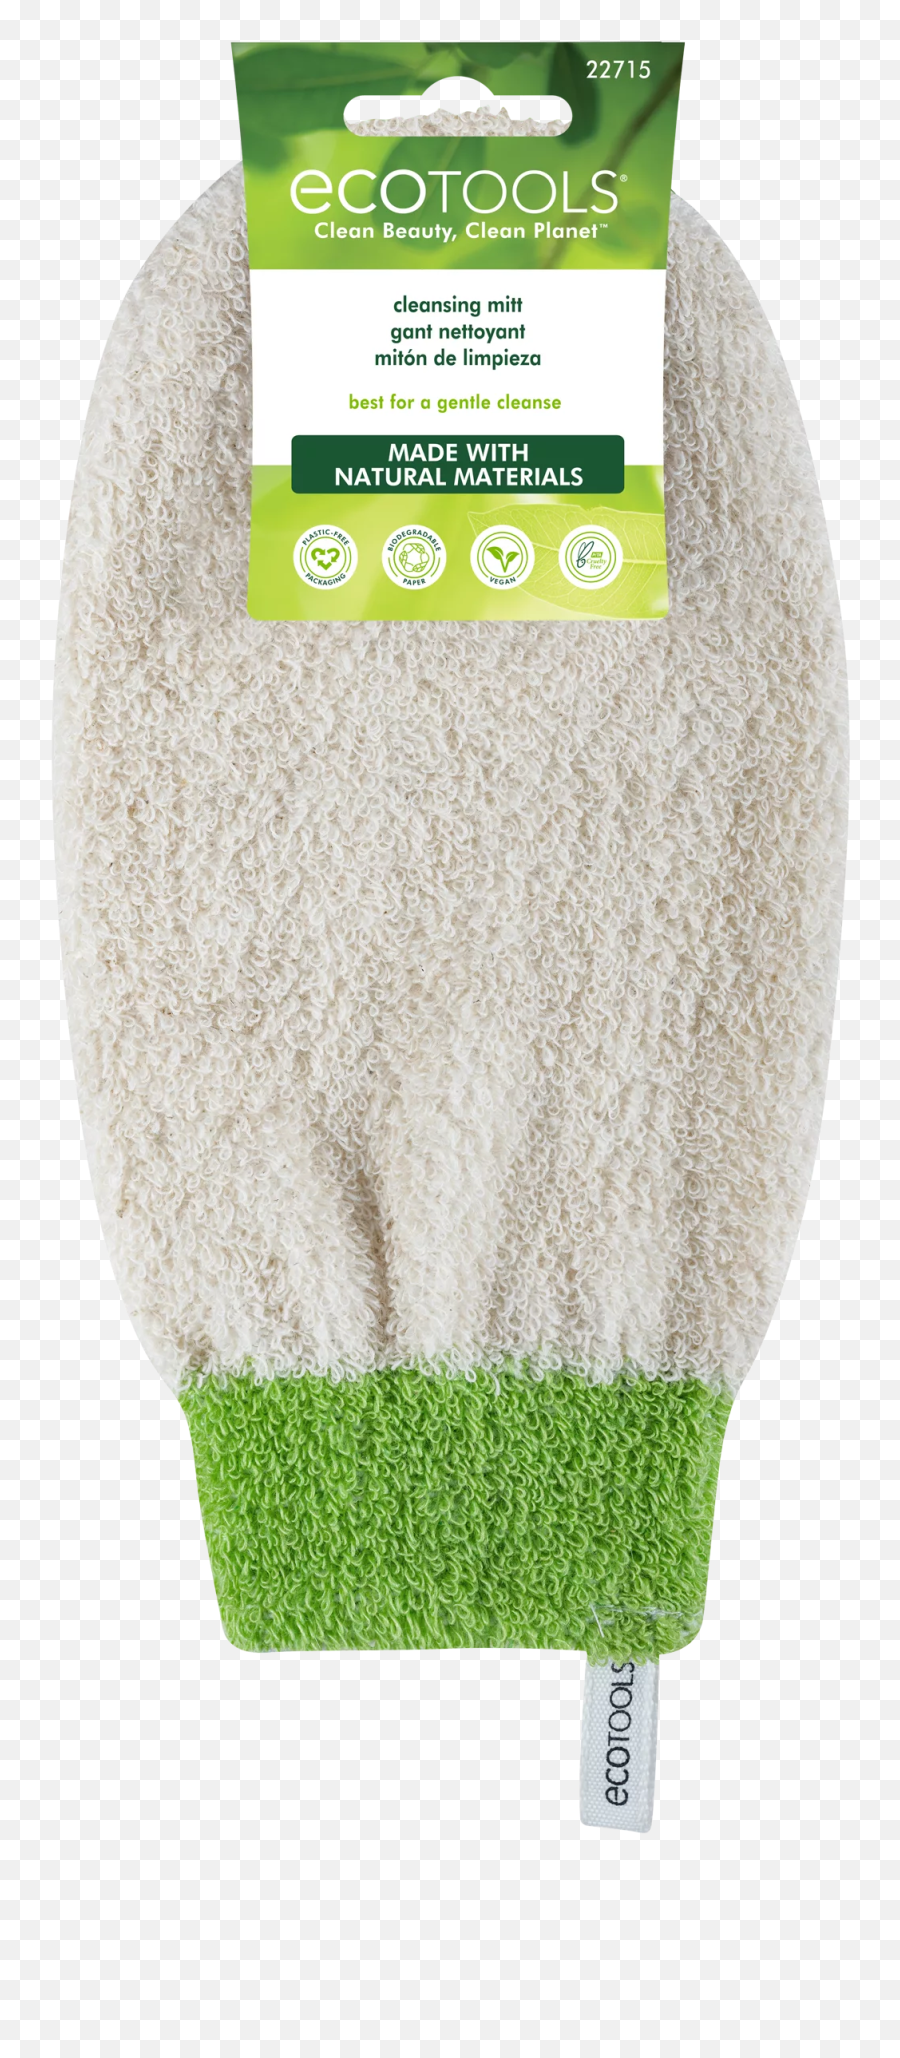 Ecotools Bath And Shower Cleansing Mitt For Body Moderate Exfoliation Single Emoji,Limpieza Png